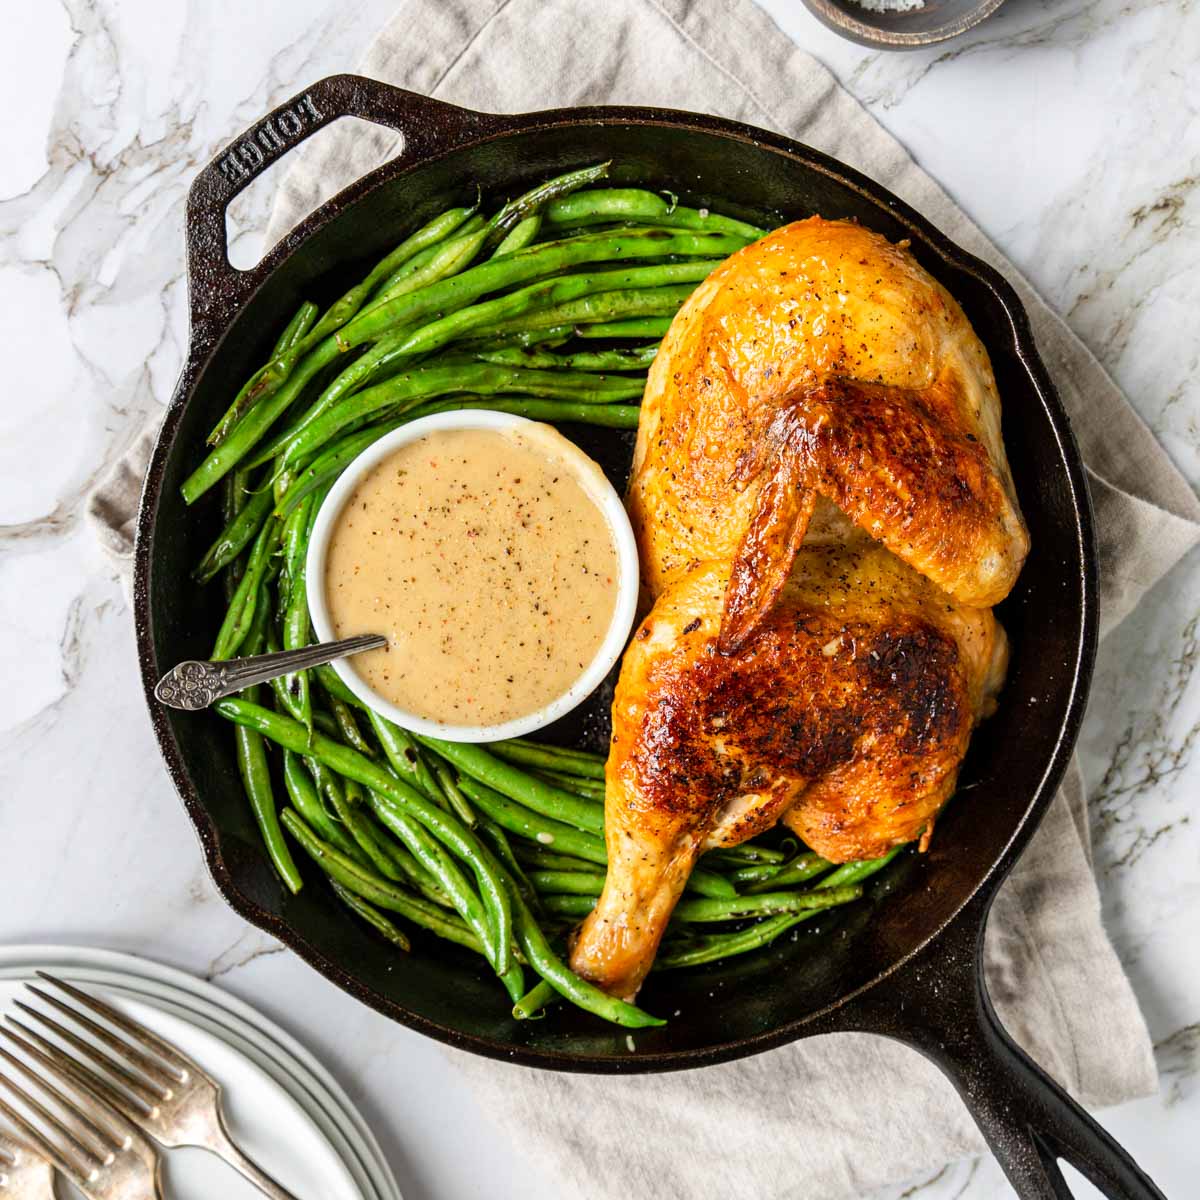 Cast Iron Roasted Half Chicken | Video tutorial included!